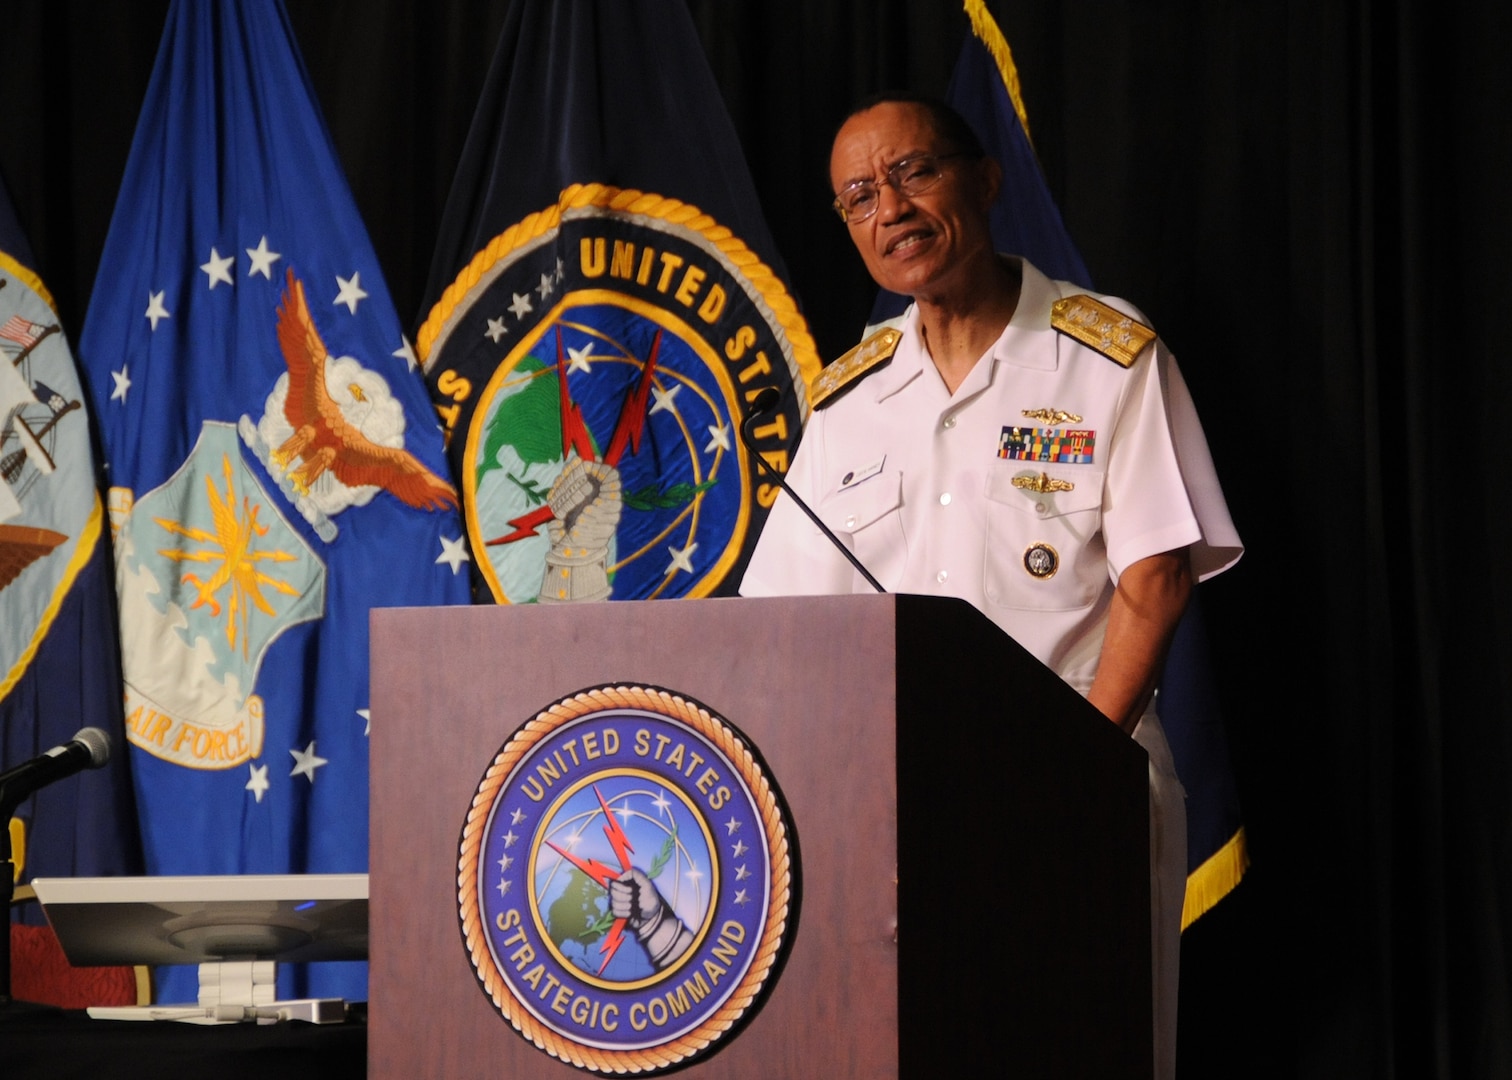 LA VISTA, Neb. (July 27, 2016) U.S. Navy Adm. Cecil D. Haney, U.S. Strategic Command (USSTRATCOM) commander, welcomes attendees to the seventh annual USSTRATCOM Deterrence Symposium, La Vista, Neb., July 27, 2016. During the two-day symposium, industry, military, governmental, international and academic experts held discussions to promote collaboration on global deterrence. One of nine DoD unified combatant commands, USSTRATCOM has global strategic missions assigned through the Unified Command Plan, which include strategic deterrence; space operations; cyberspace operations; joint electronic warfare; global strike; missile defense; intelligence, surveillance and reconnaissance; combating weapons of mass destruction; and analysis and targeting. (DoD photo by Steve Cunningham/Released)